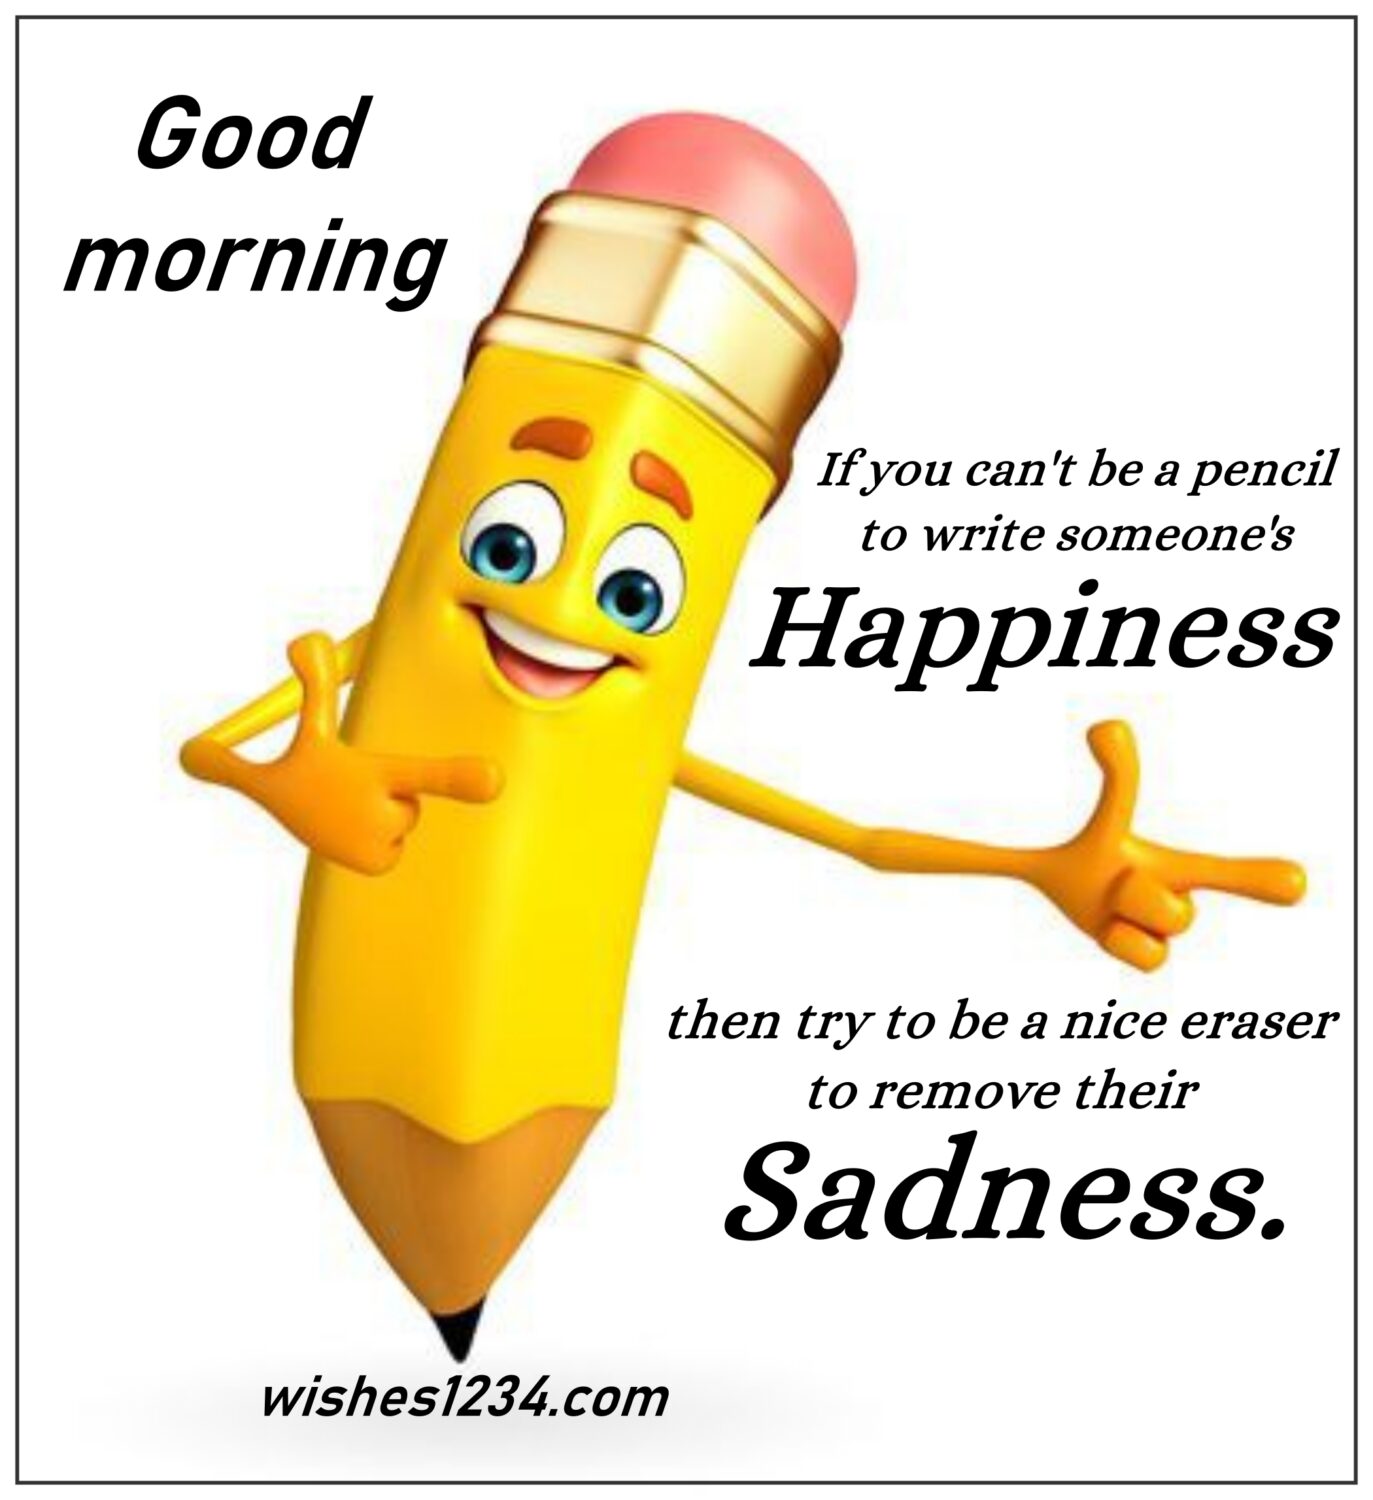 Pencil with eraser wallpaper, Good Morning Monday | Monday Wishes | Monday quotes.